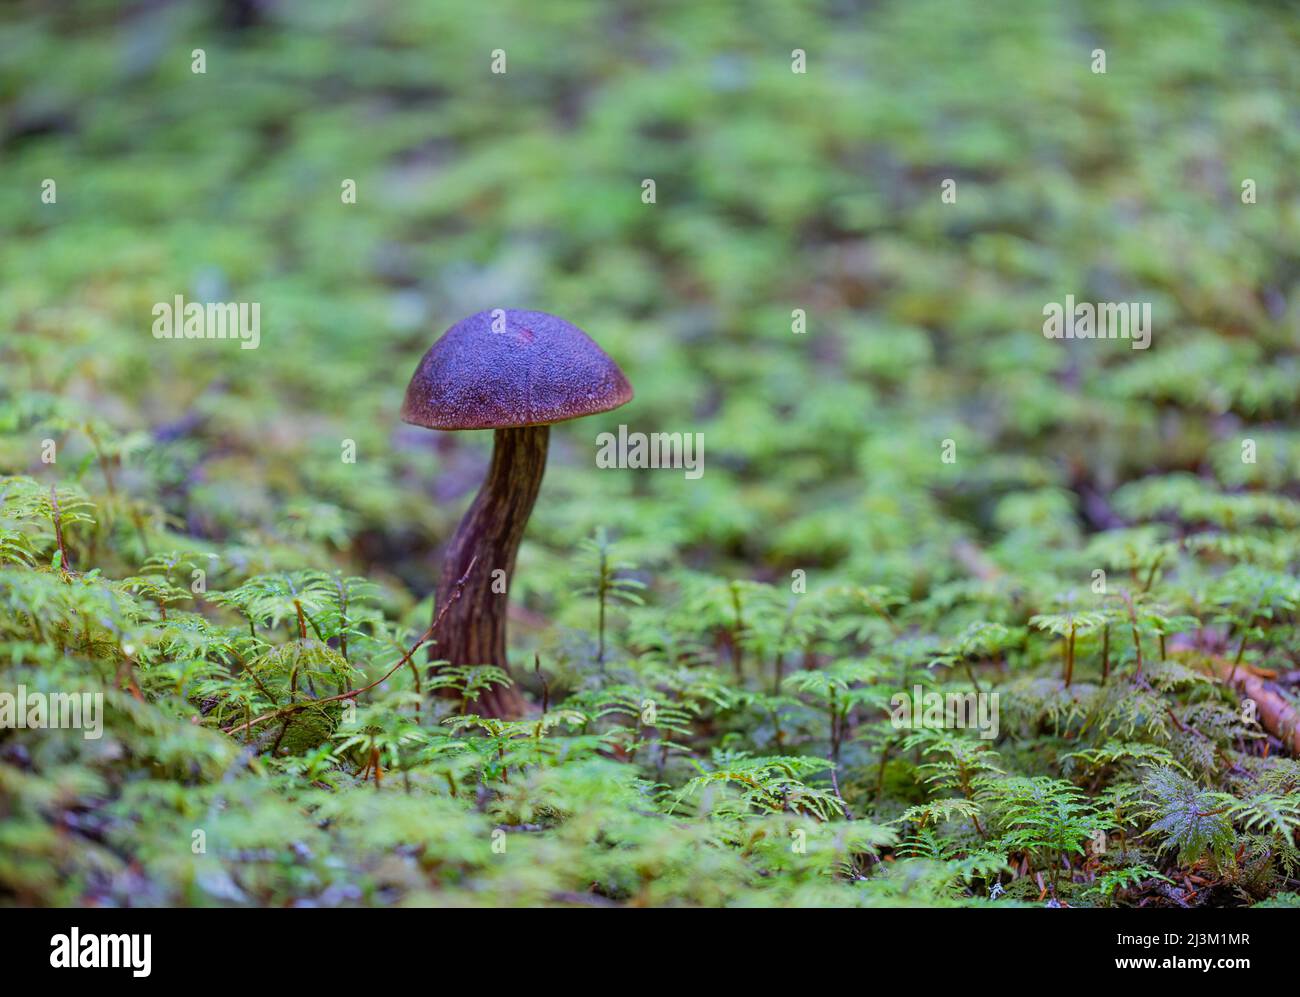 One mushroom growing in green foliage on the ground; British Columbia, Canada Stock Photo